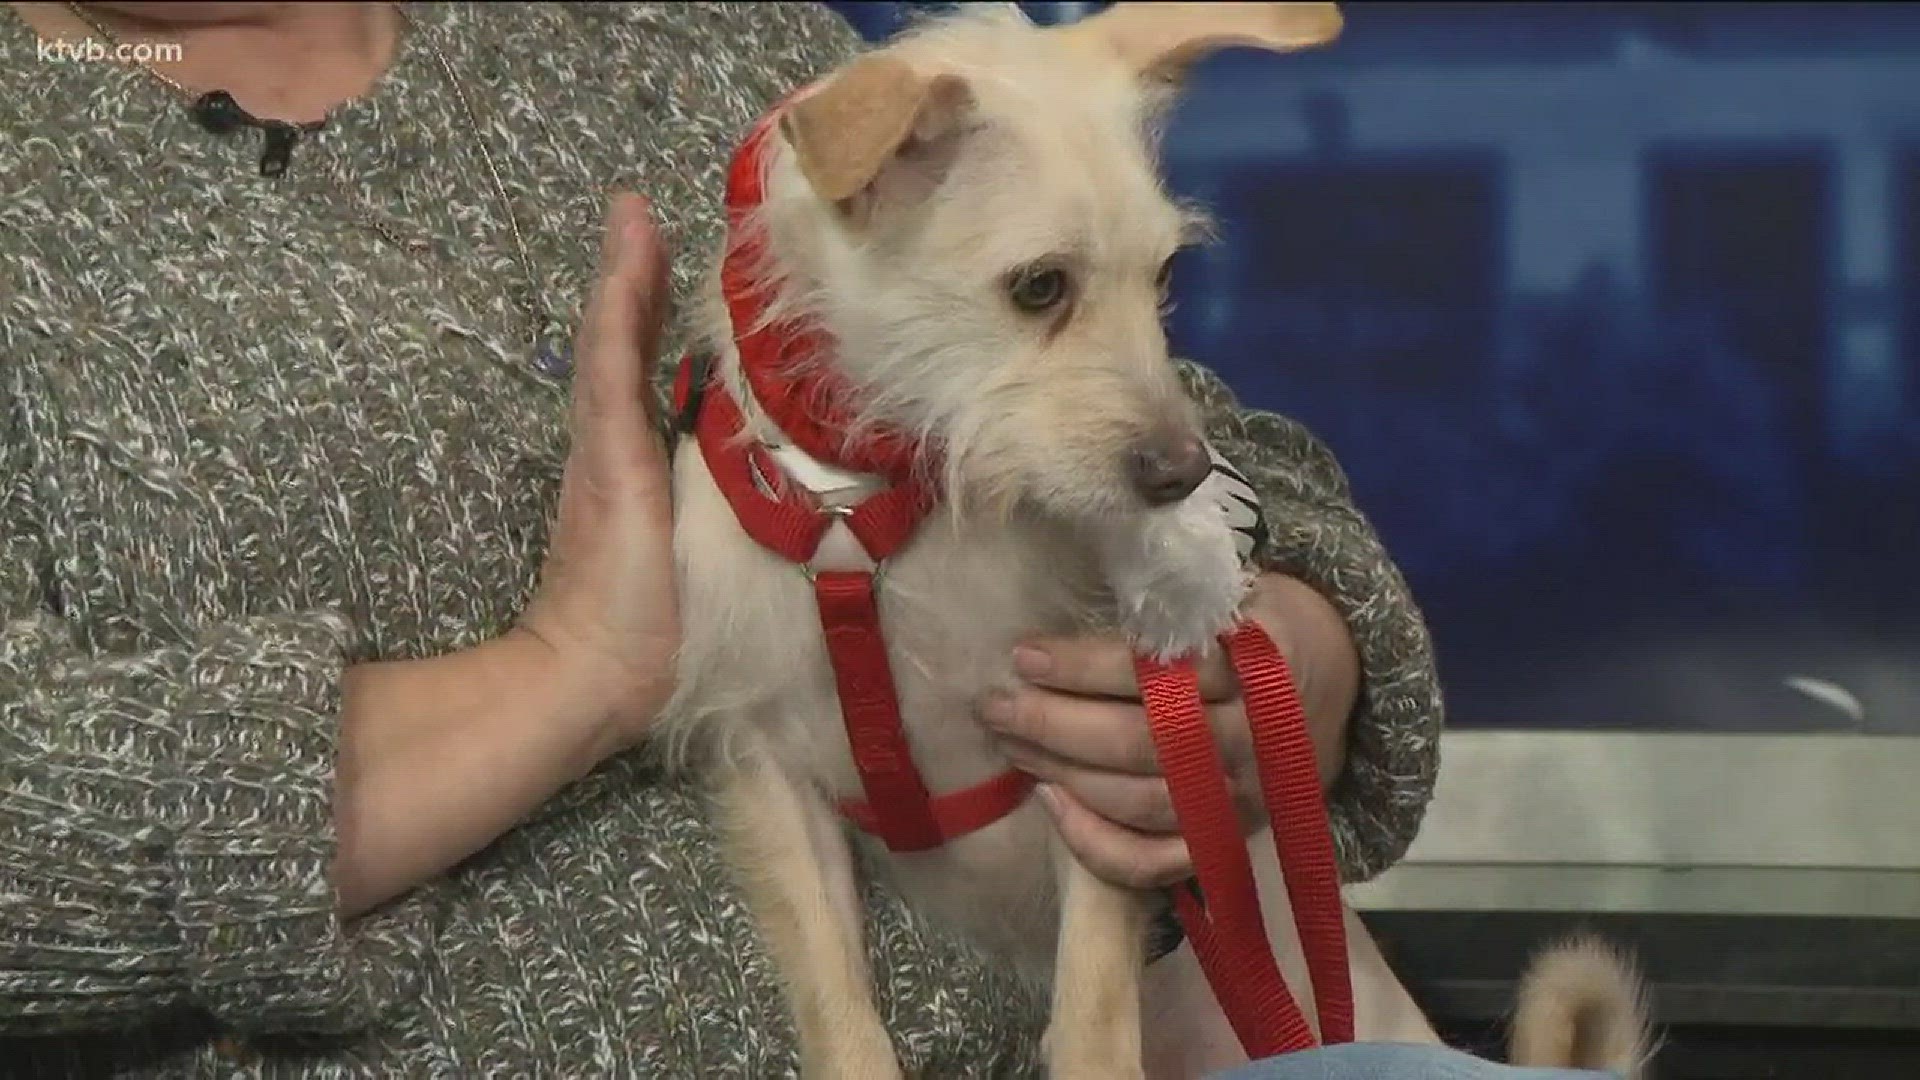 Stray #8 is Tyler. He is a 3-year-old terrier mix that transferred to Idaho from New Mexico